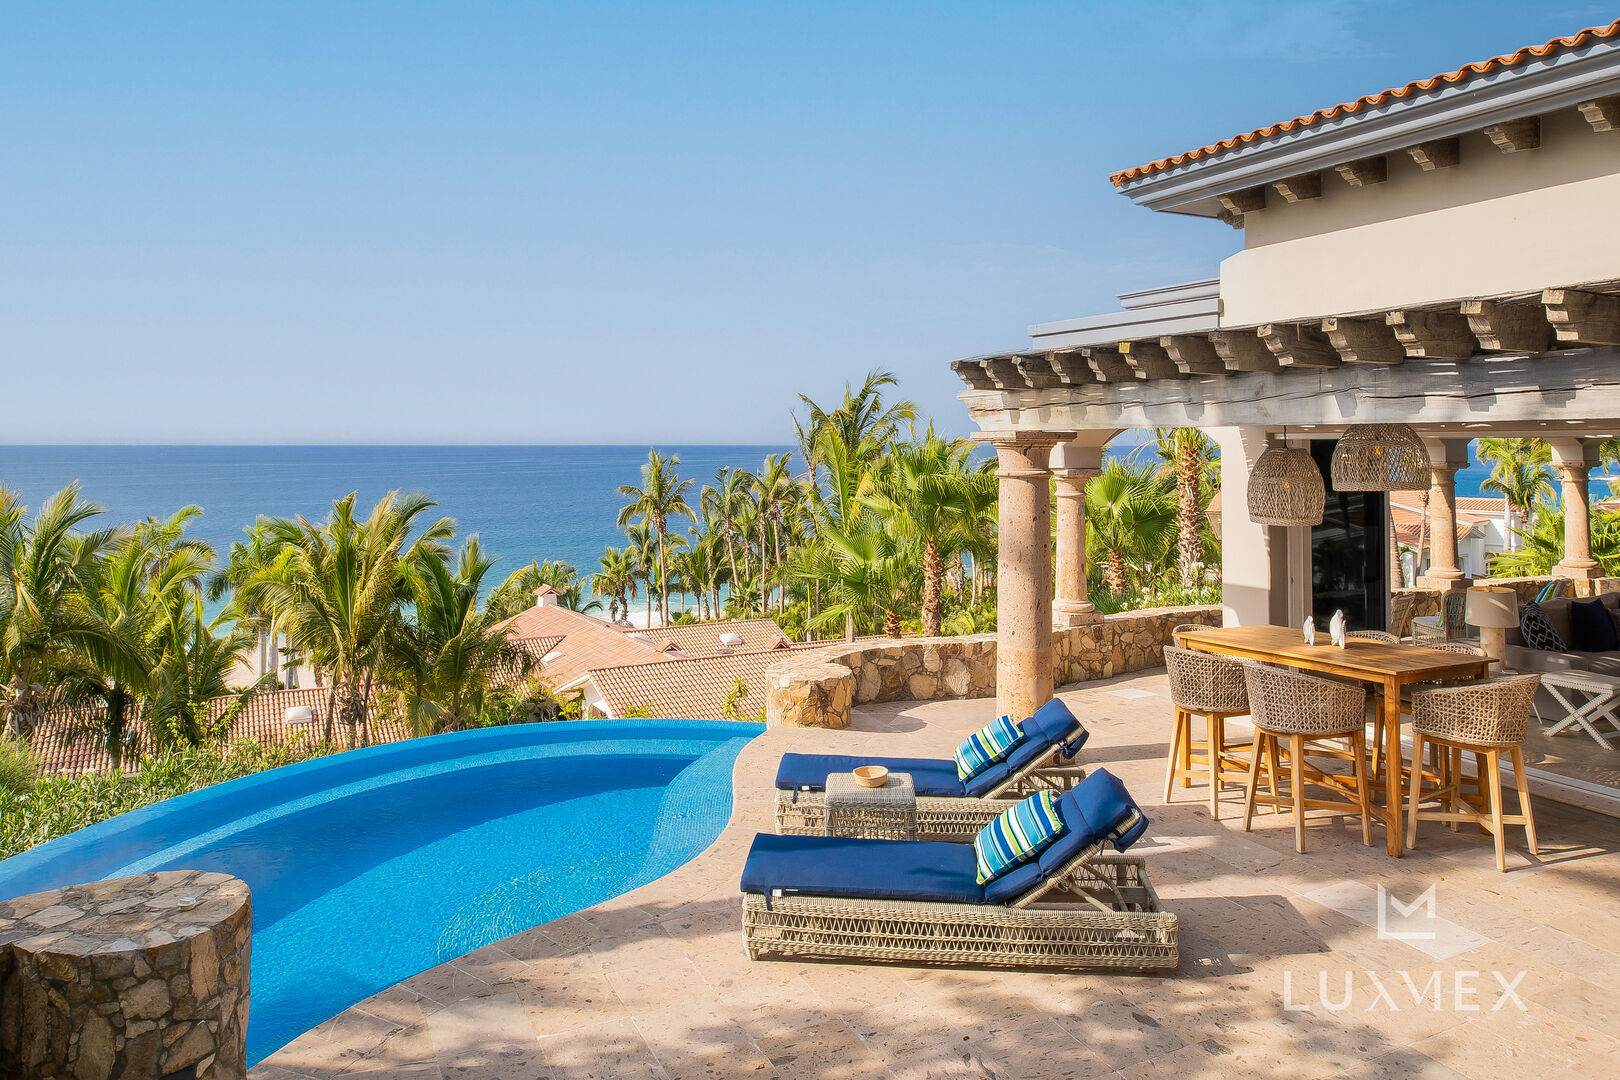 Views of the ocean and other surrounding homes from the pool of this Los Cabos Luxury Vacation Villa.